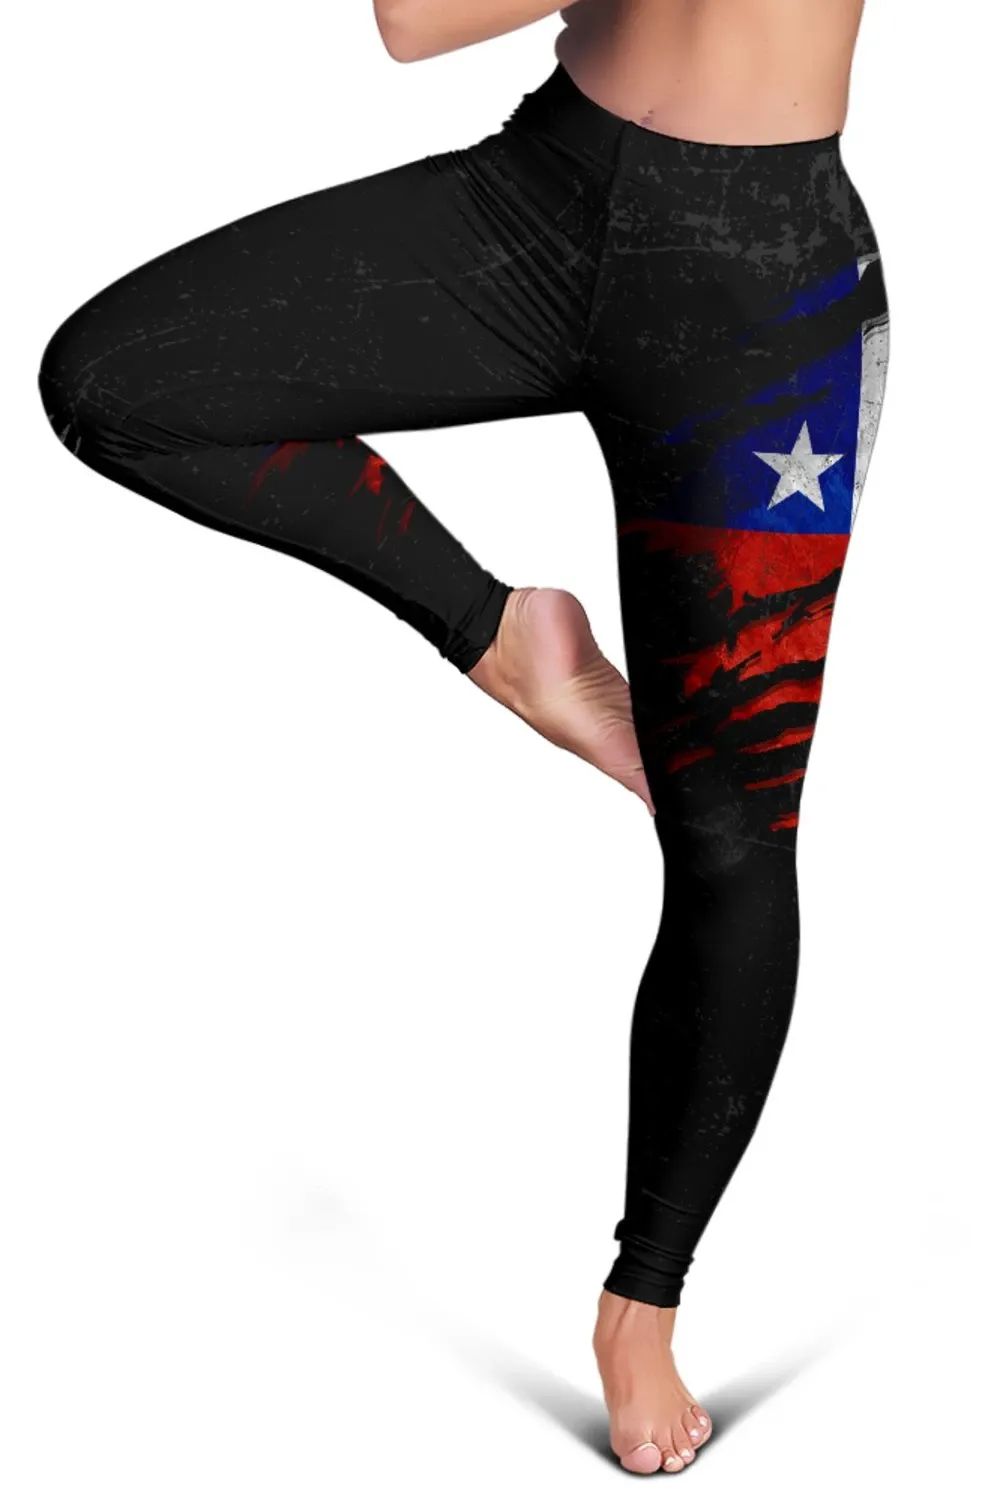 chile-in-me-womens-leggings-special-grunge-style